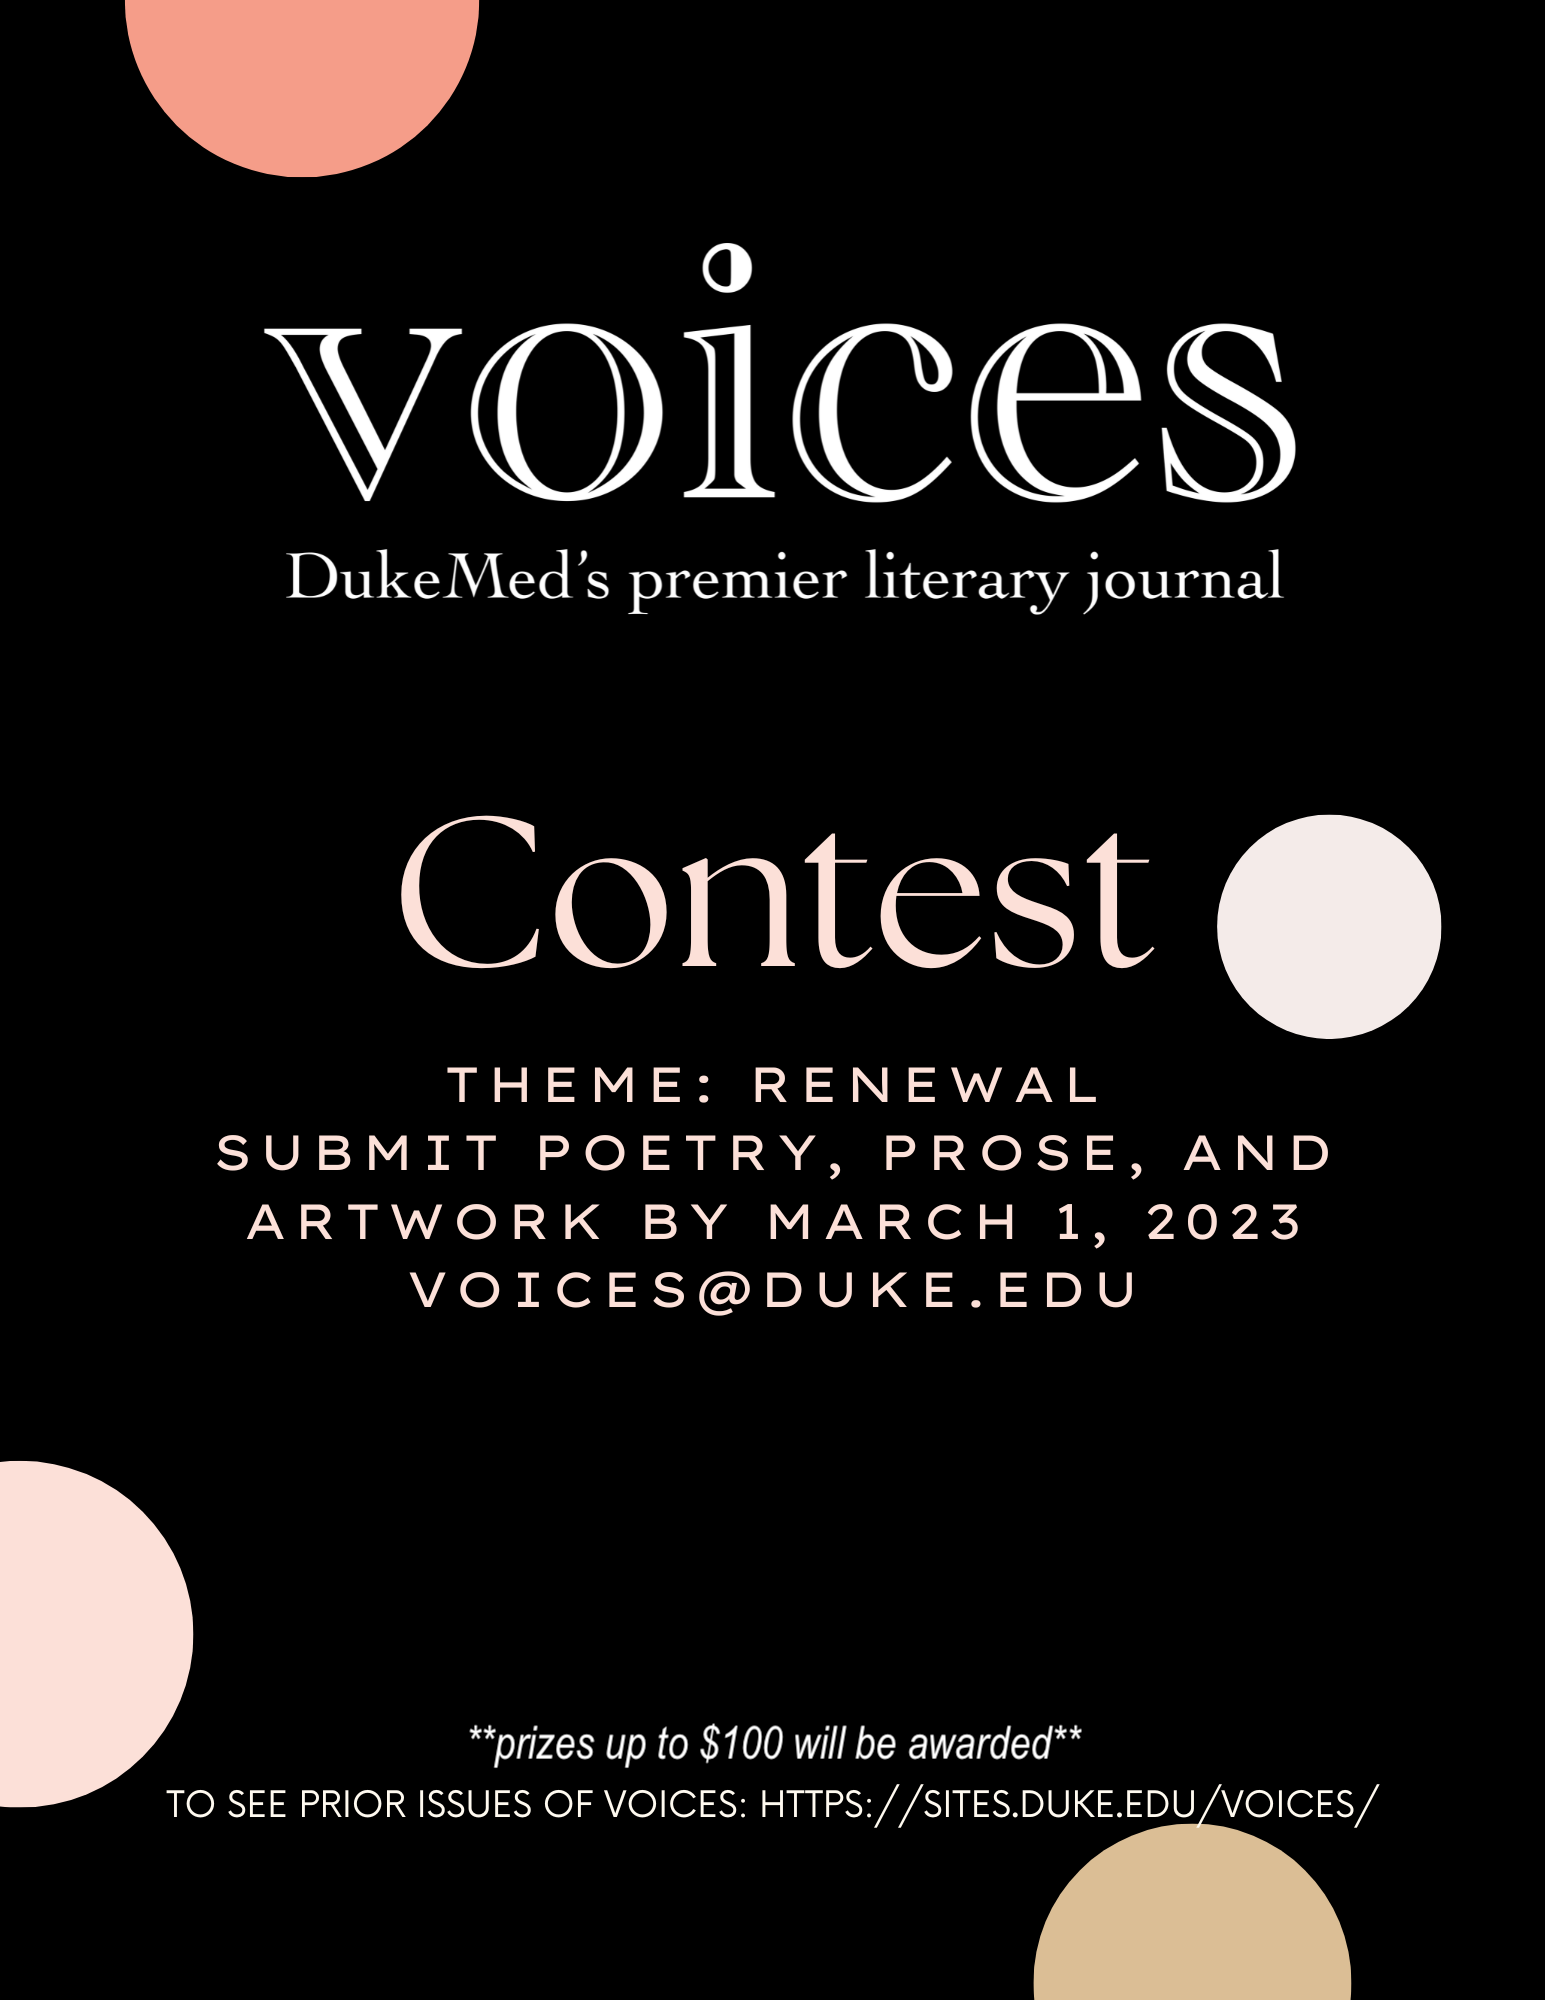 VOICES. DukeMed's premier literary journal. CONTEST. Theme: Renewal. Submit poetry, prose, and artwork by March 1, 2023. voices@duke.edu. to see prior issues of voices visit sites.duke.edu/voices for more information. **prizes available**